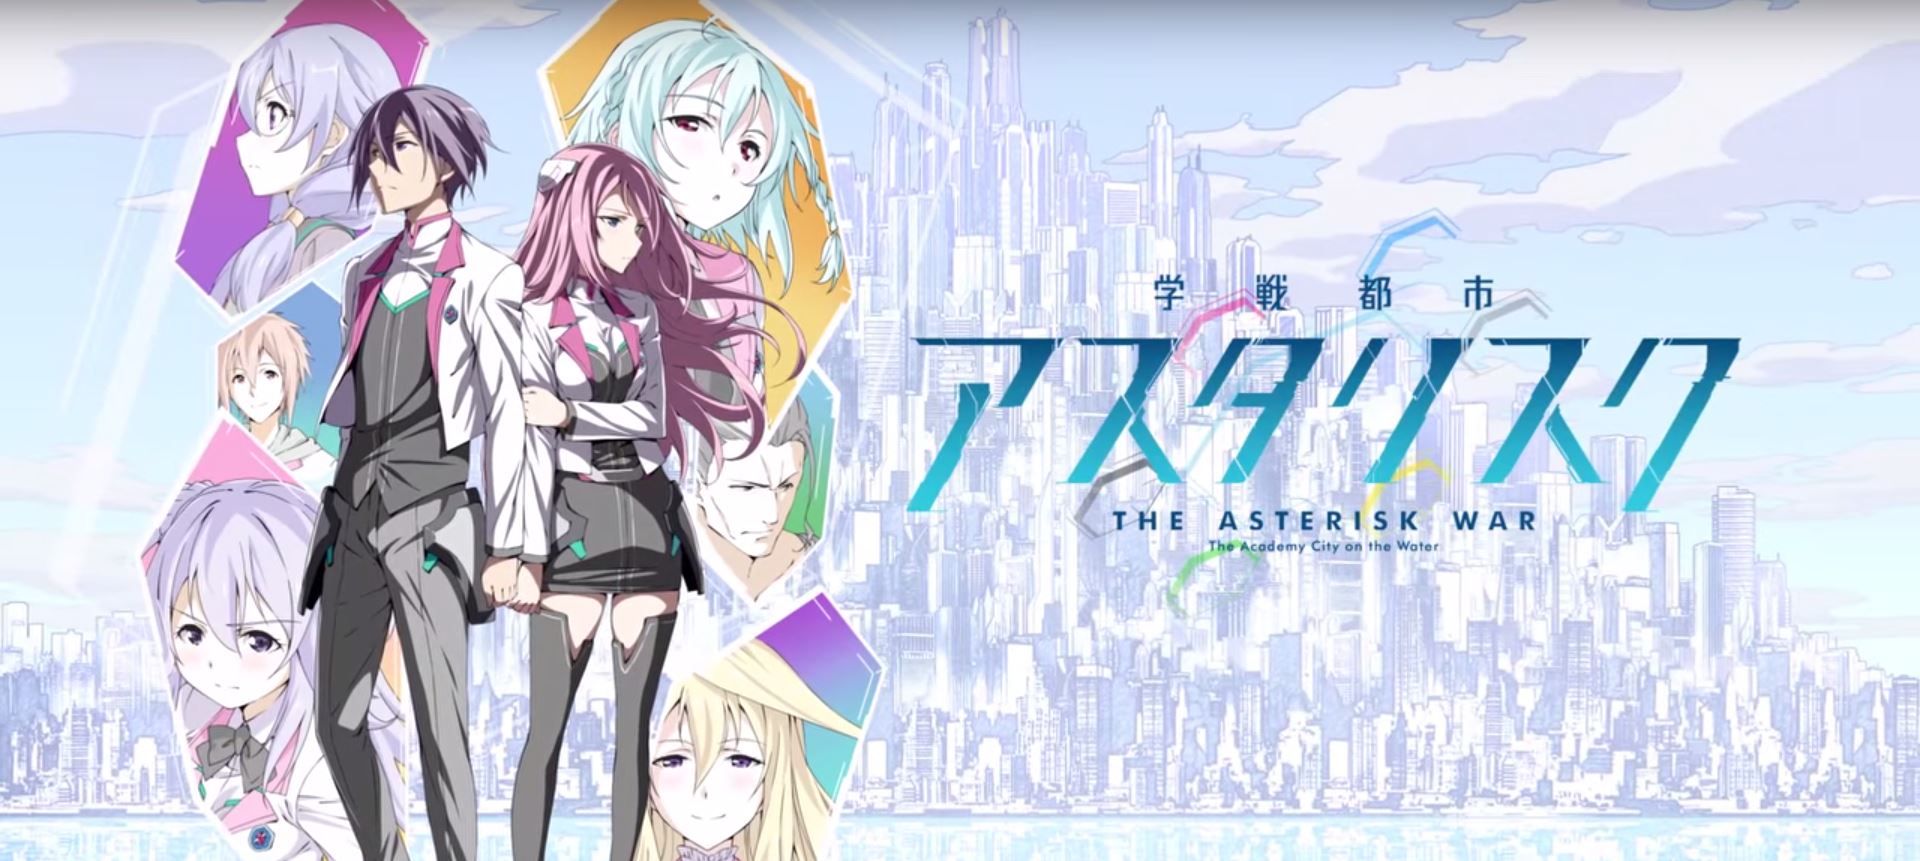 X The Asterisk War The Academy City On The Water Wallpaper De Anime The Asterisk War